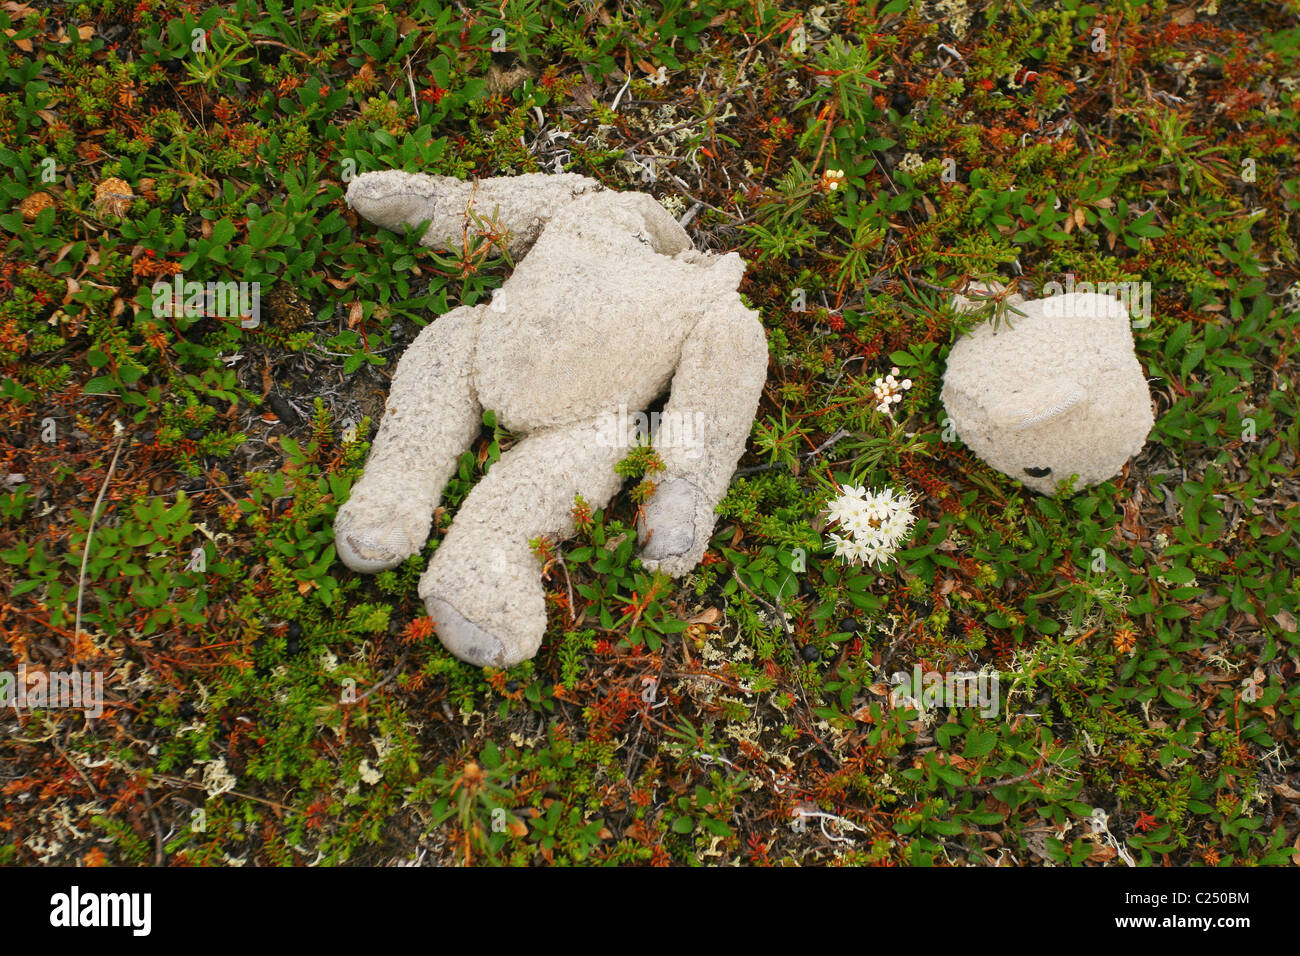 Soft toy 'Teddy bear' torn and thrown on the abandoned camp of nomadic reindeer herders. Tundra, Yamal peninsula, RUSSIA Stock Photo